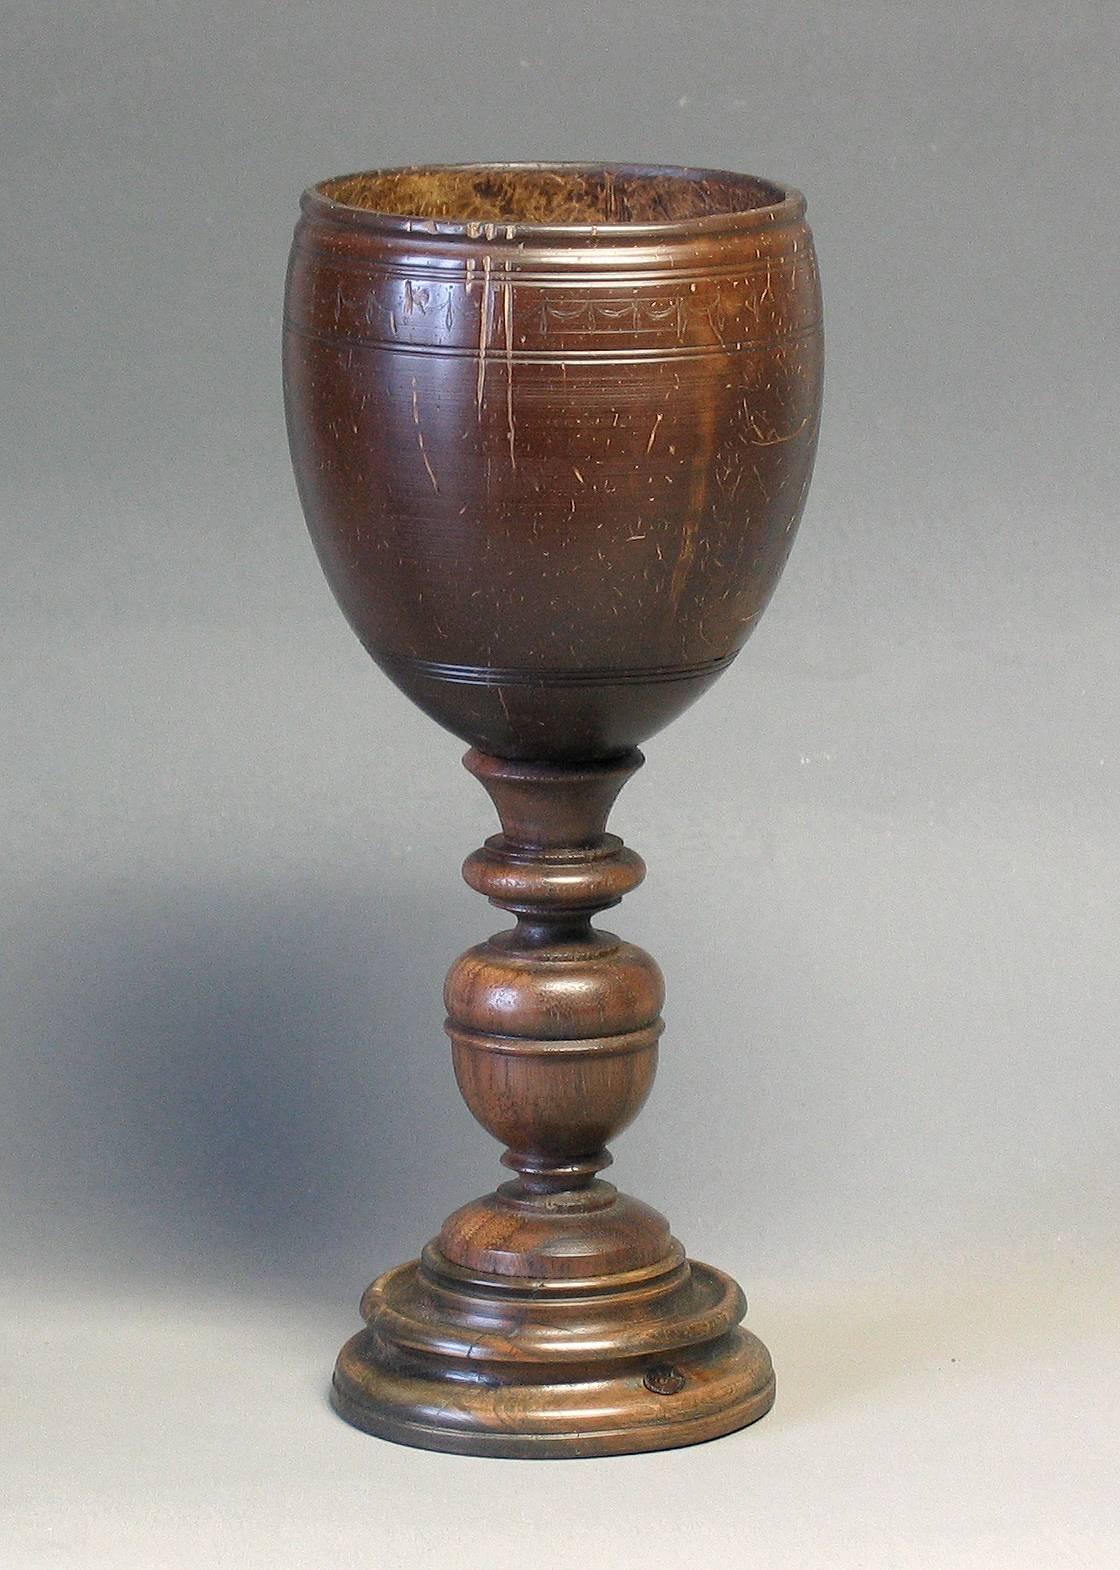 Hand-Crafted Finely Proportioned Coconut Goblet in 17th Century Taste